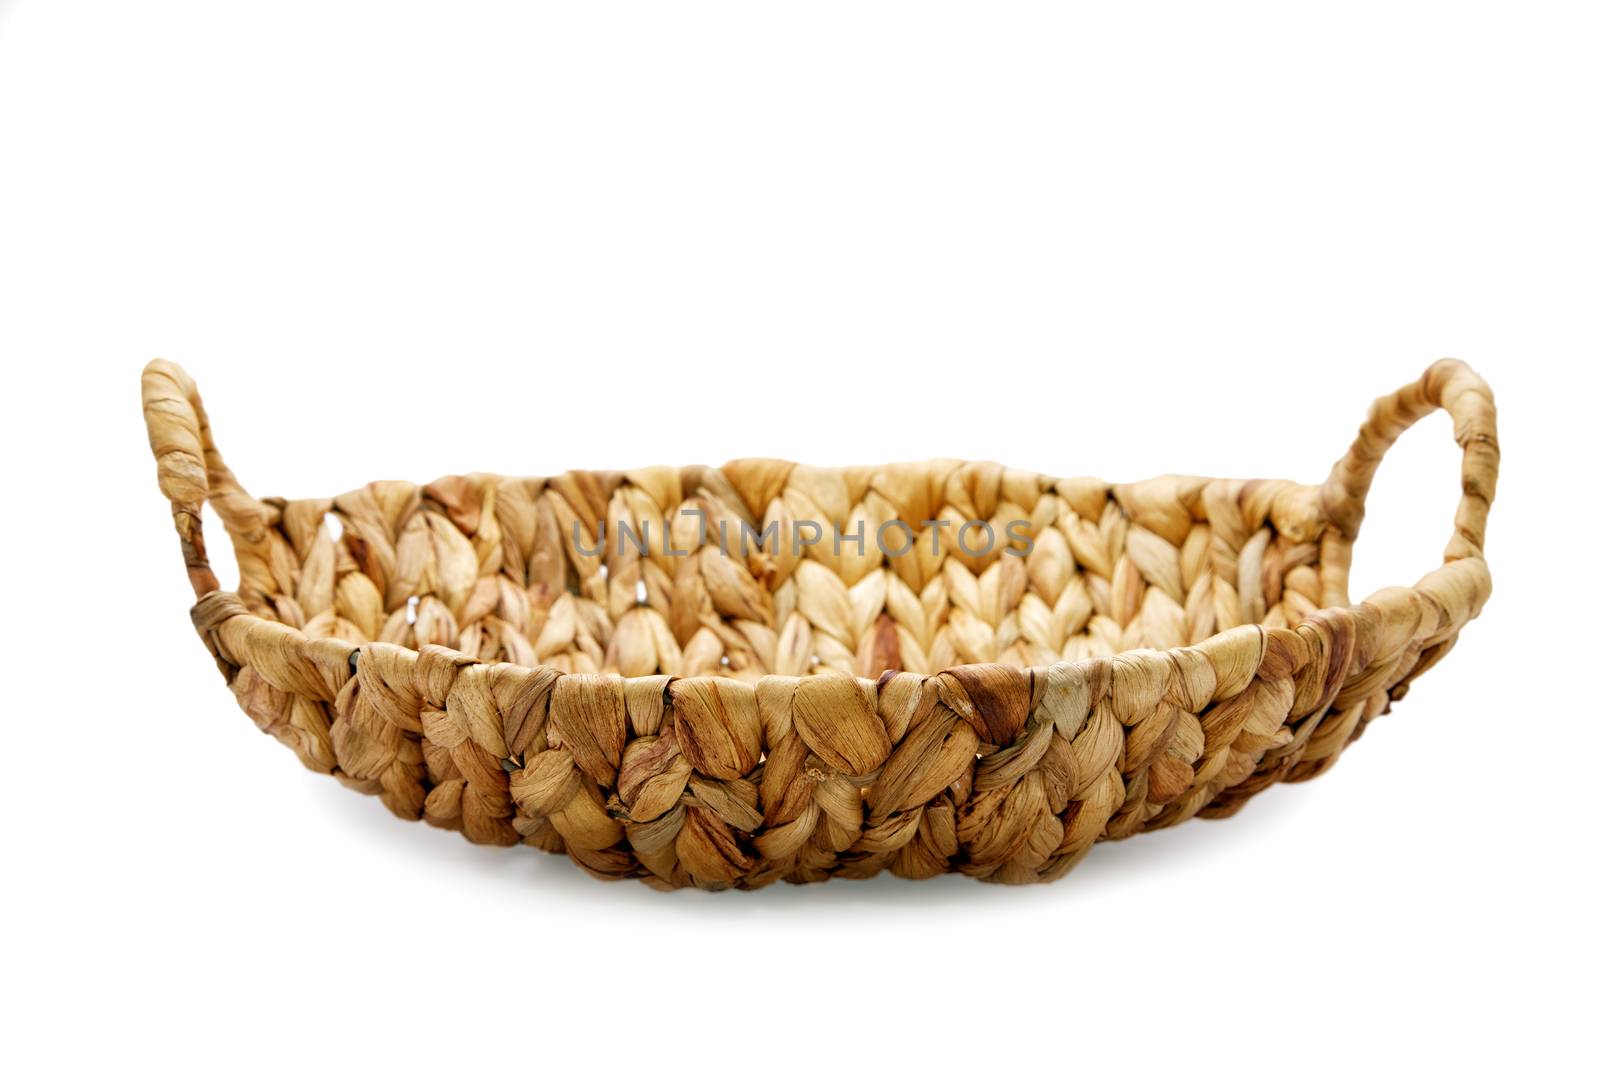 Wattled basket isolated on a white background by alarich